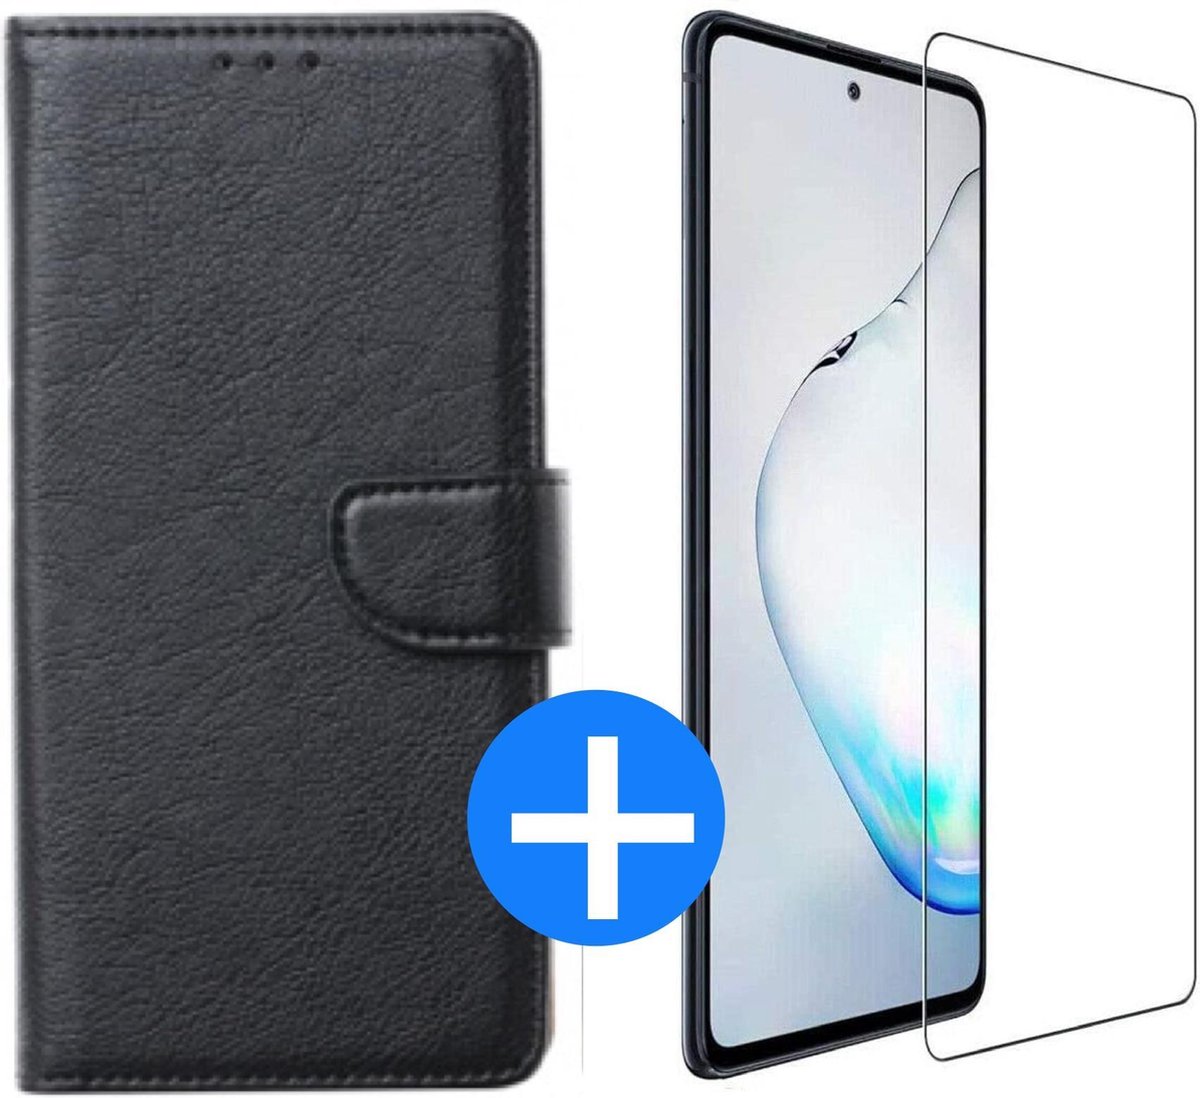 Samsung S21 Plus hoesje bookcase zwart - Samsung Galaxy s21 plus hoesje bookcase - Samsung S21 Plus wallet case - hoesje Samsung s21 Plus zwart + 1x Samsung S21 Plus screenprotector tempered glass screen protector glasprotector